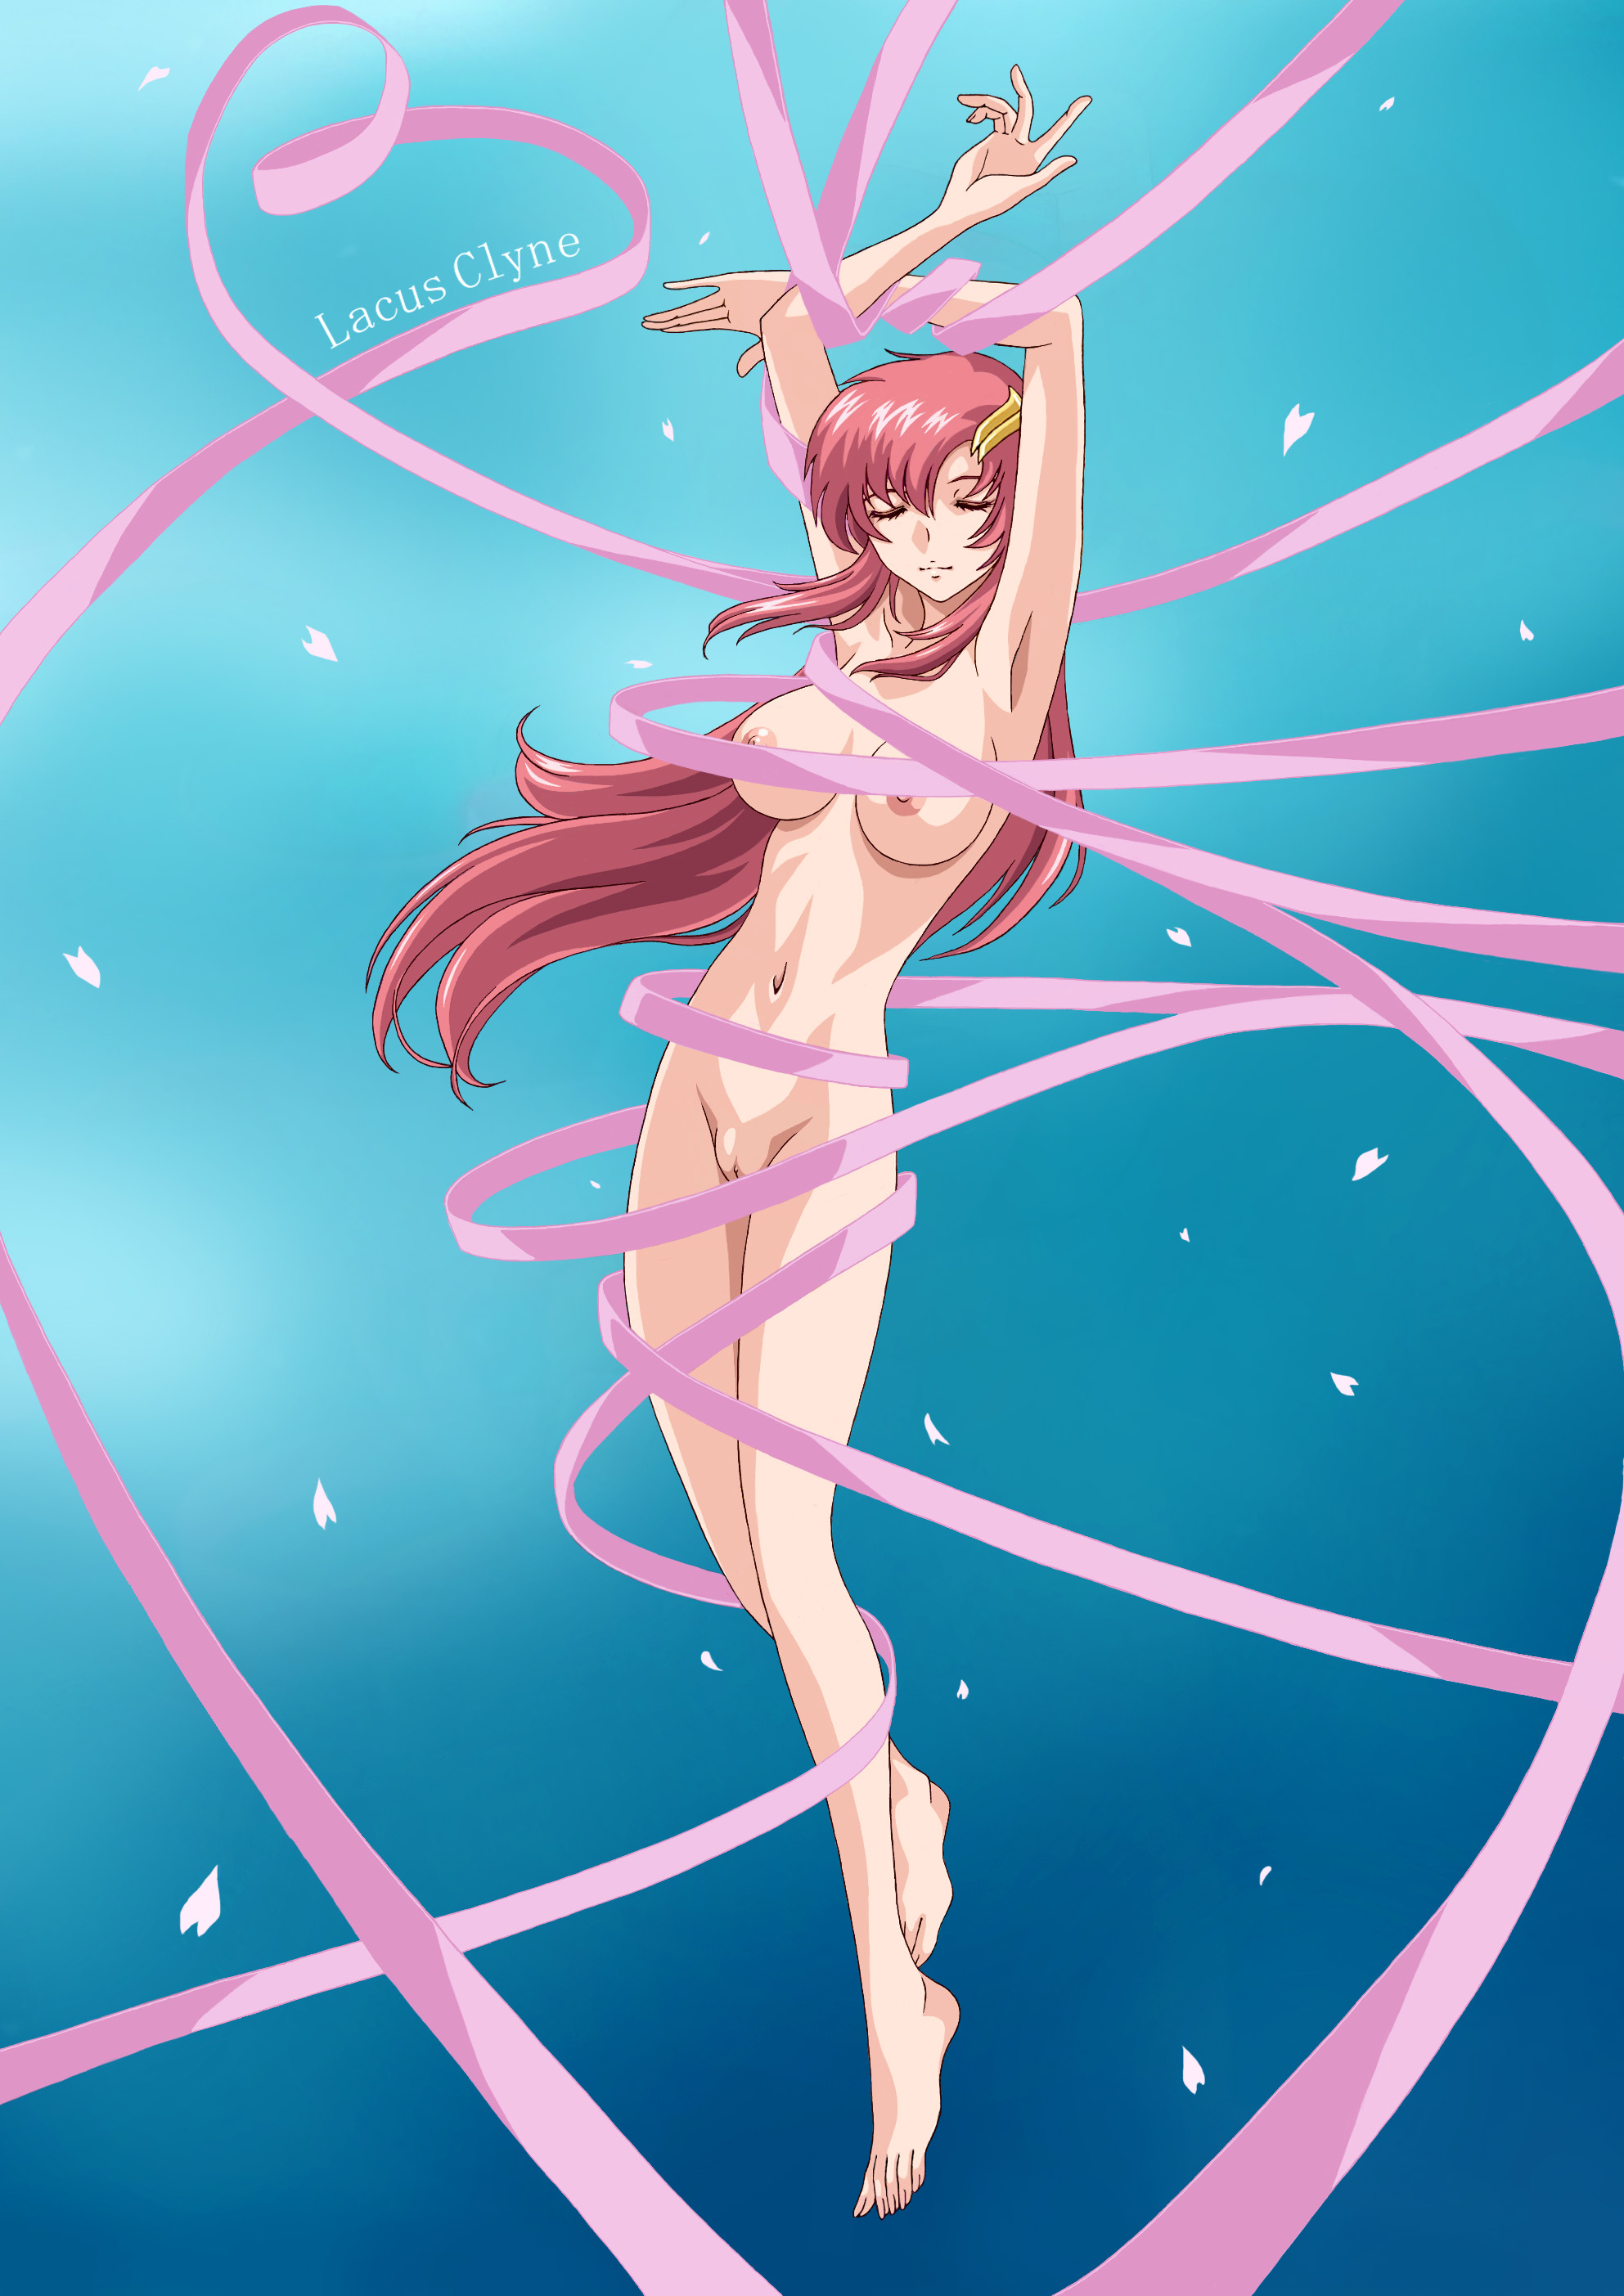 Lacus Clin Naked